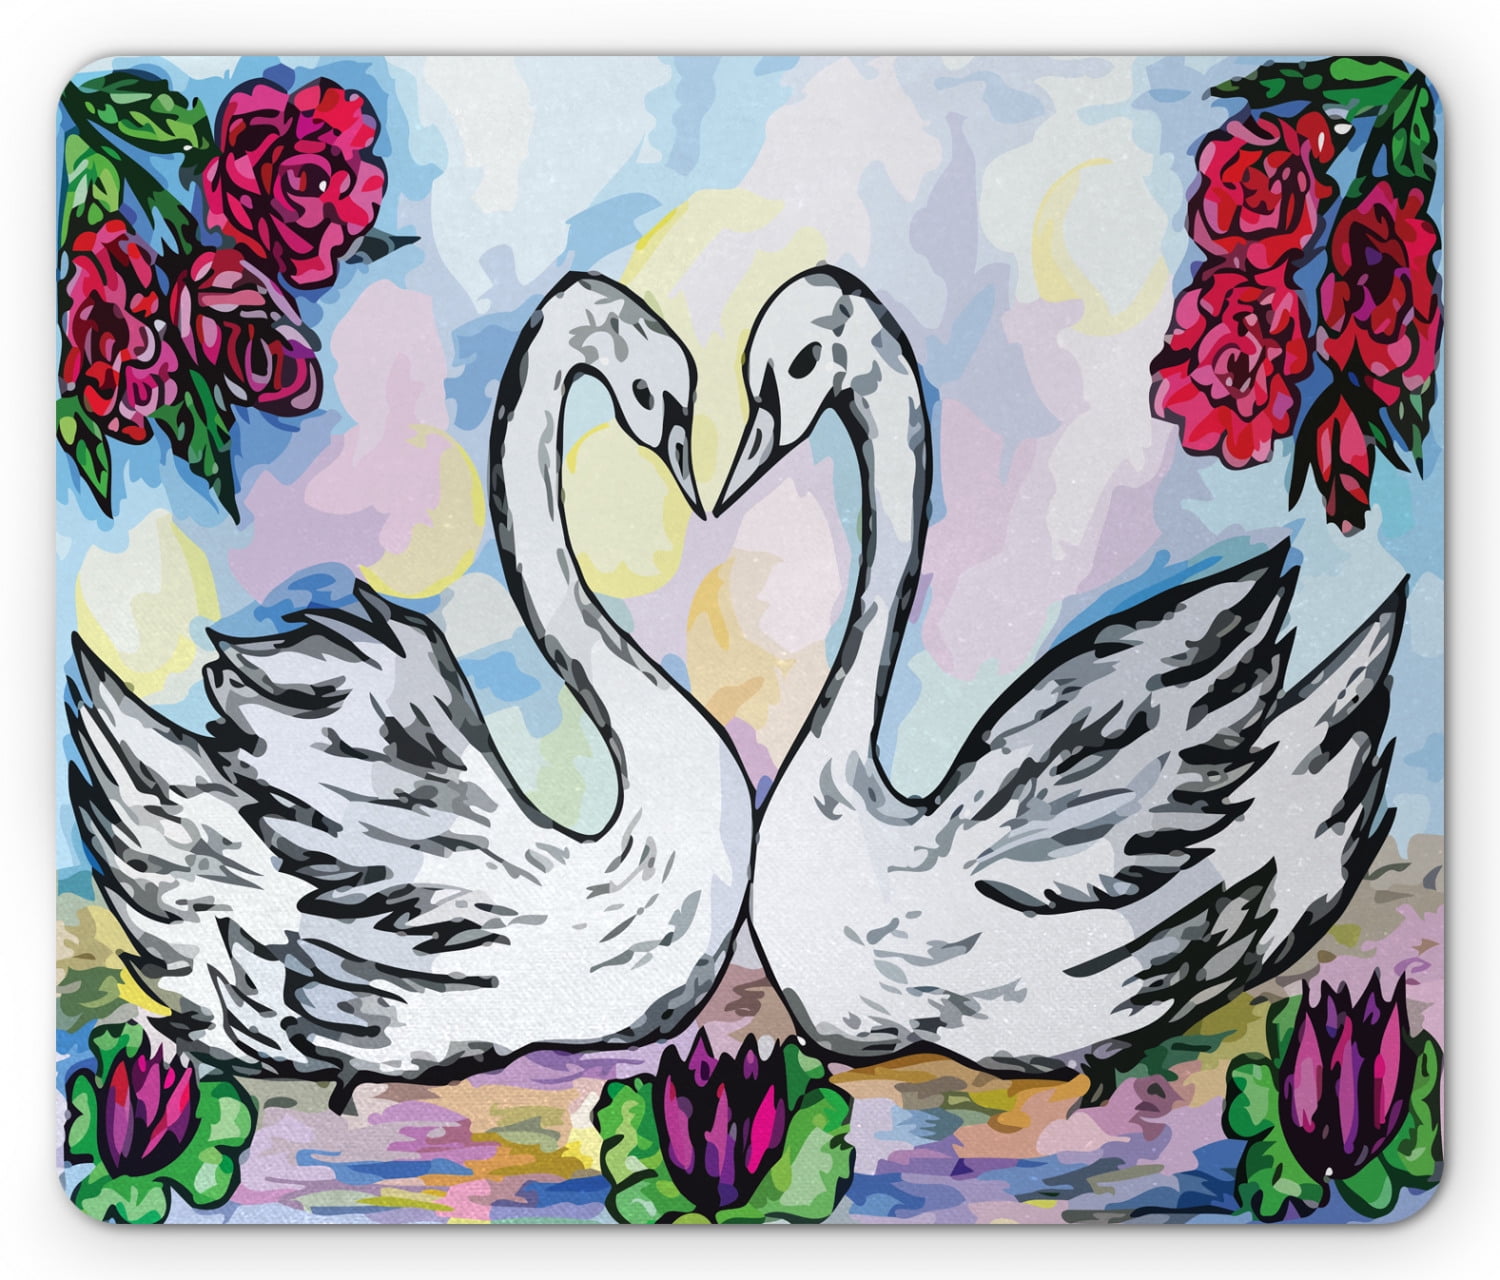 Swan Mouse Pad, Grunge Style Sketch Image of Lover White Swan Partners ...